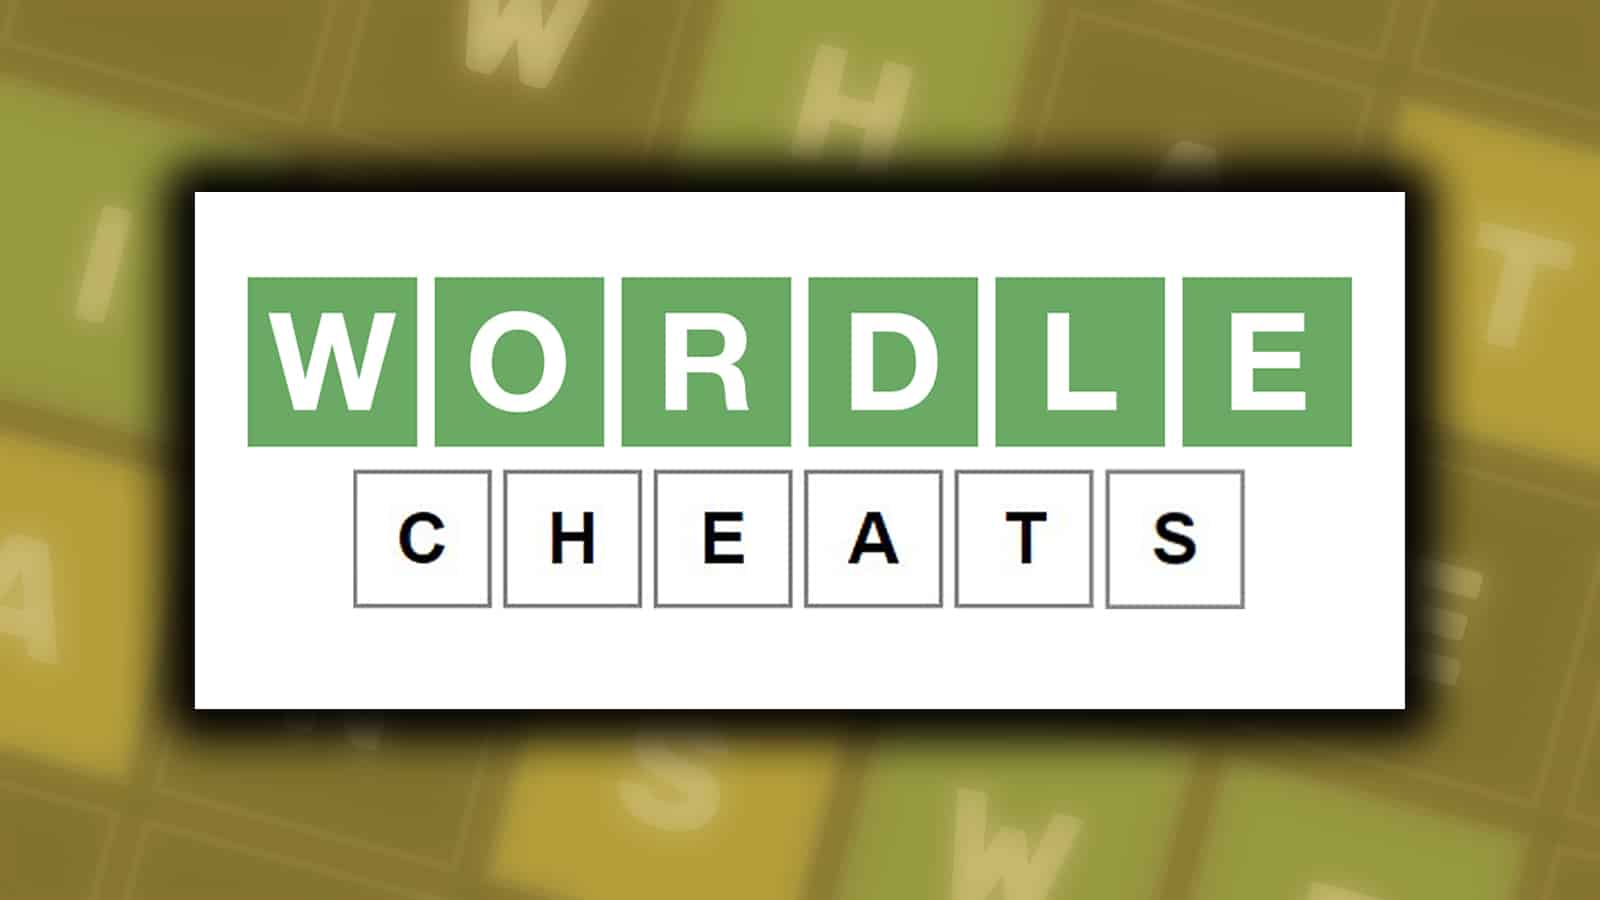 an image of Wordle cheat words